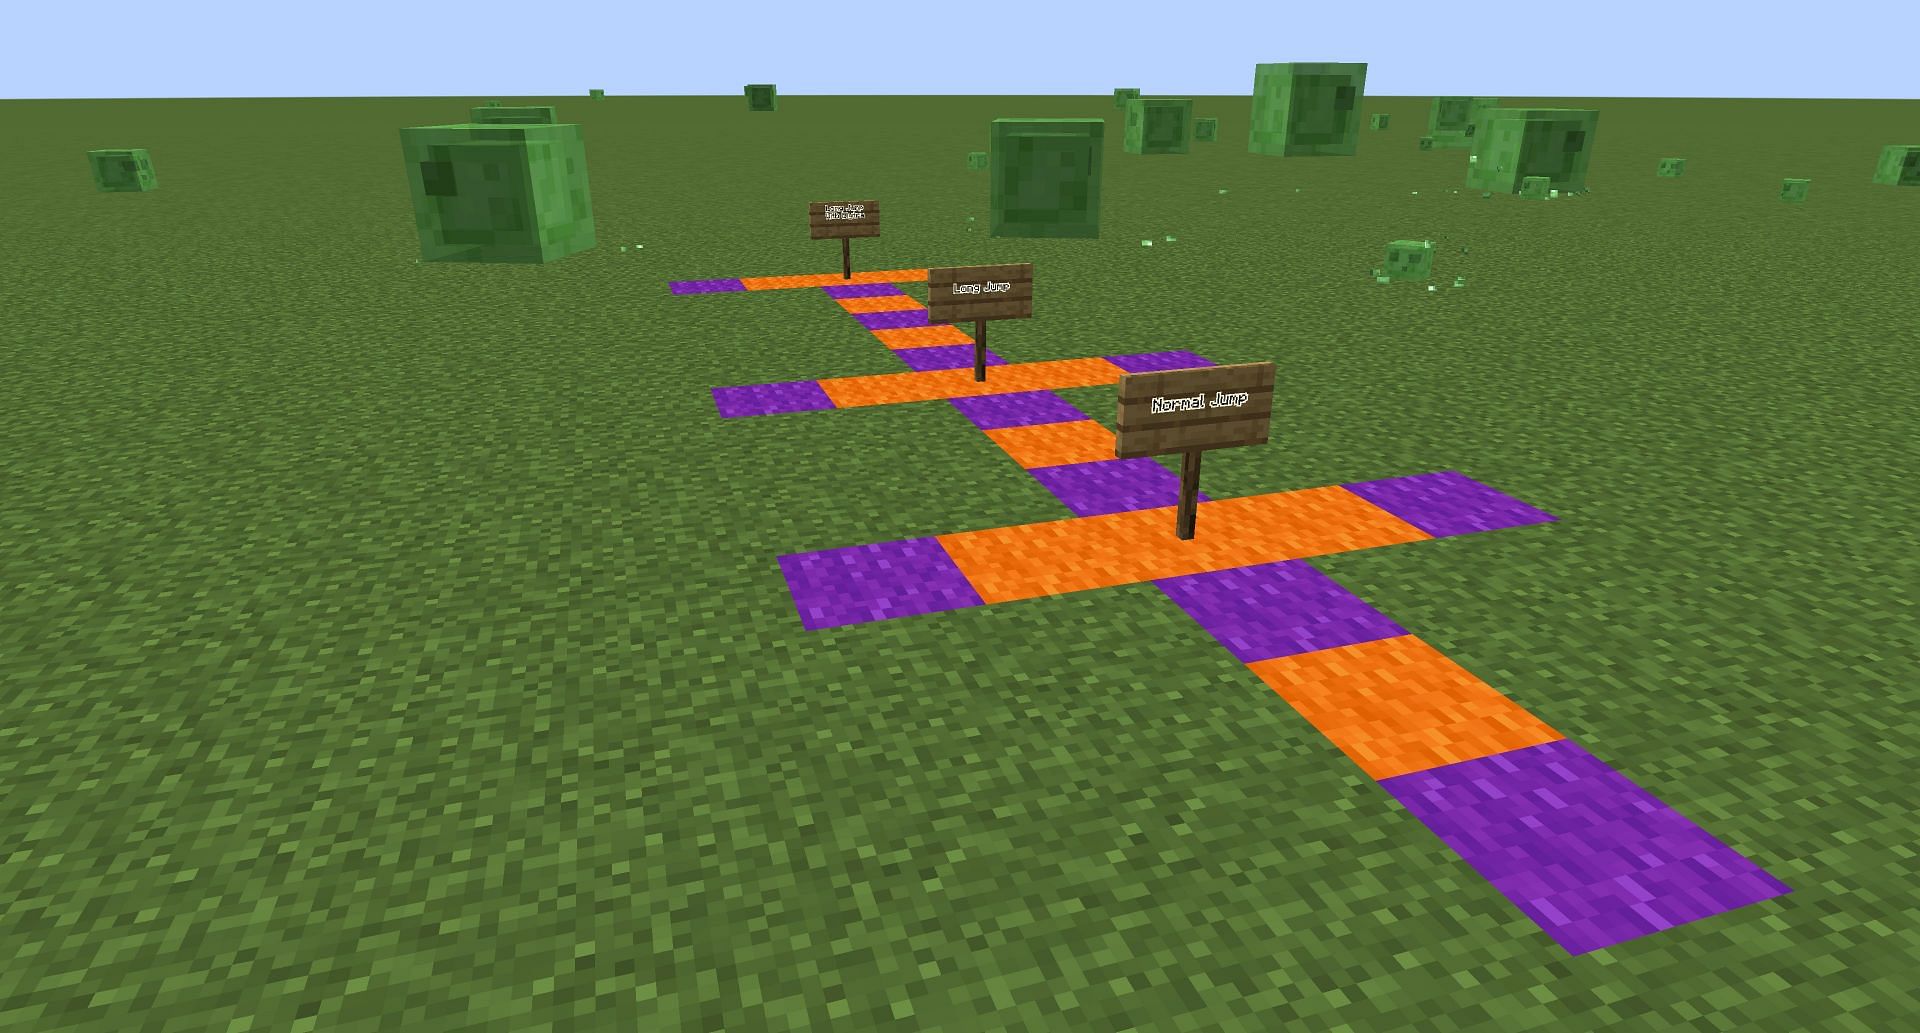 Regular, wind charge, and elytra wind charge jump distances (image via Mojang)